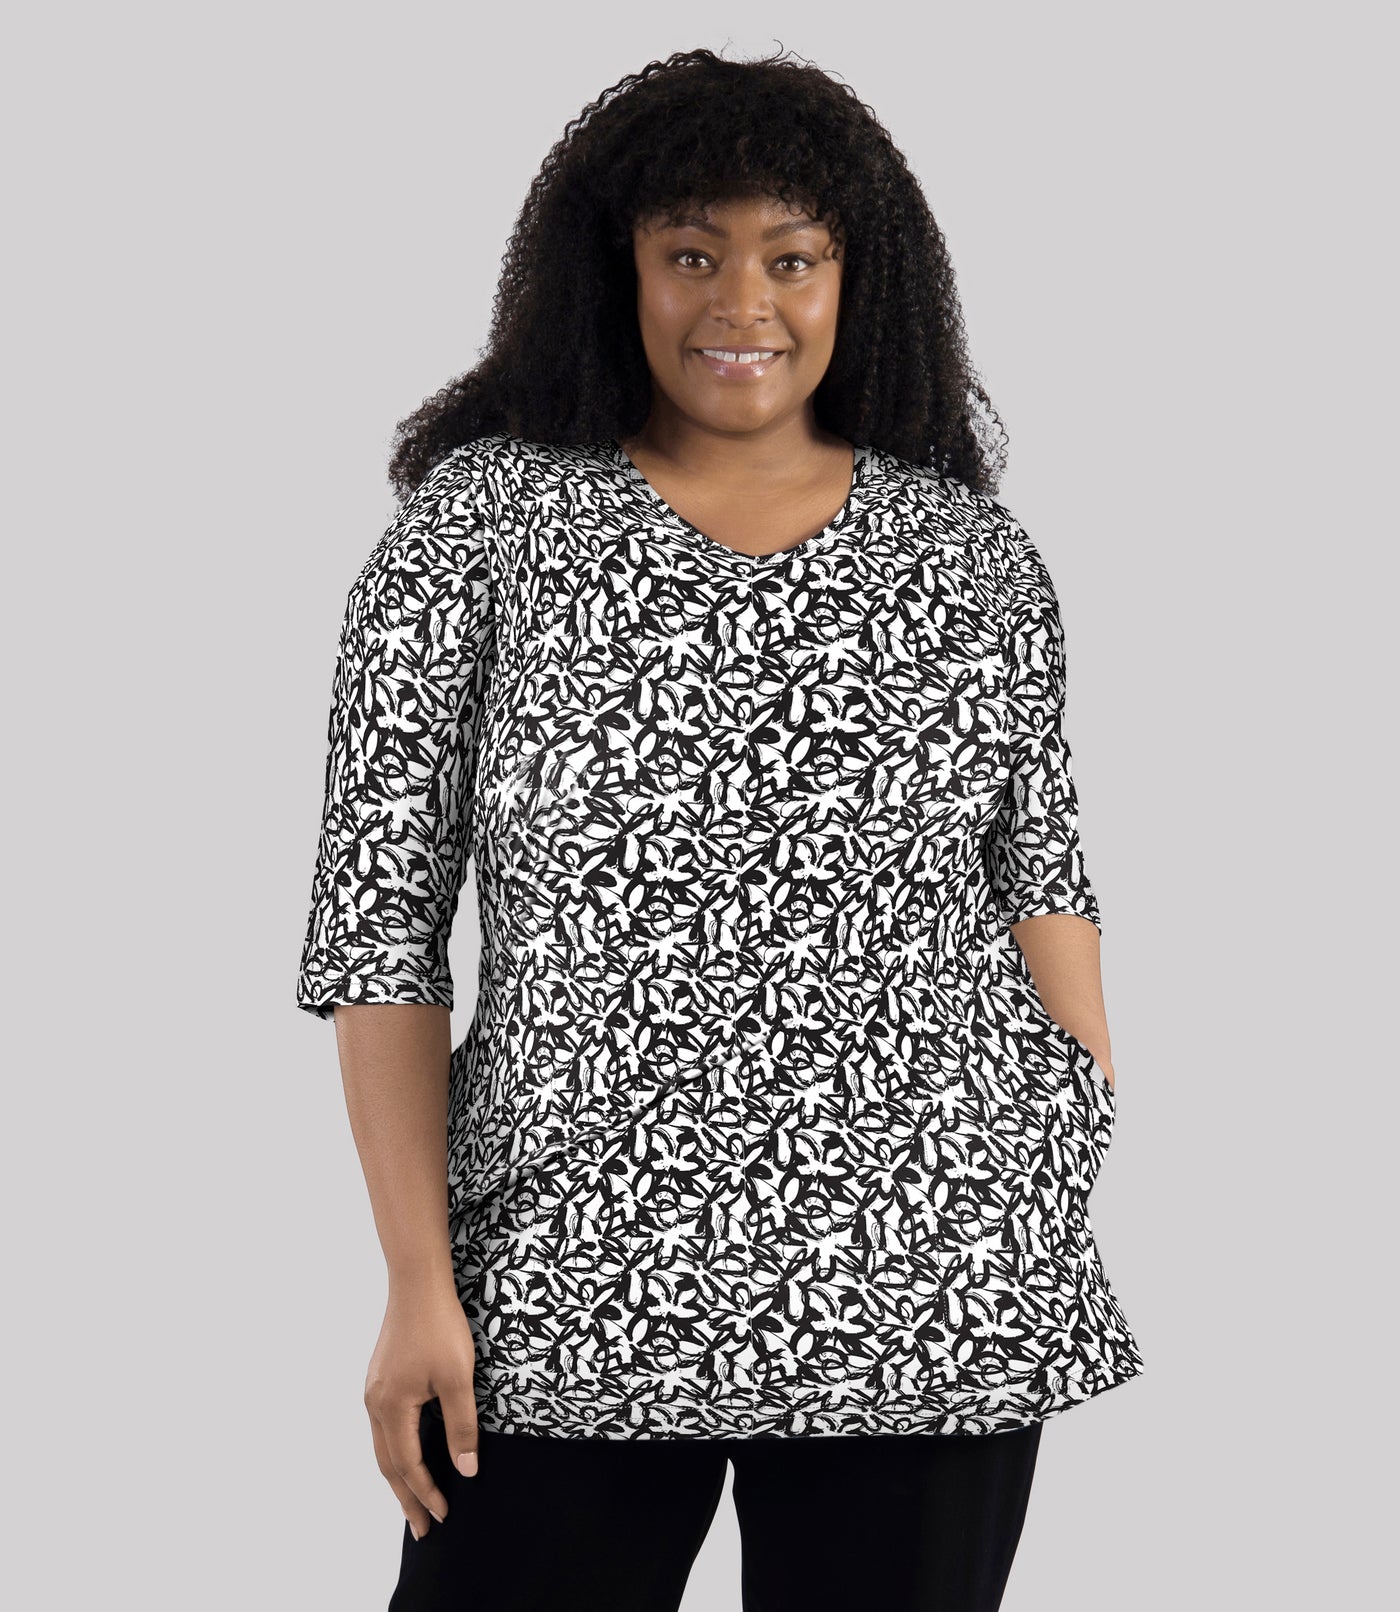 Model wearing JunoActive's Junonia Lifestyle Cotton Printed 3/4 sleeve pocket tunic in pattern black and white wildflower. Her left hand is in left pocket of shirt.